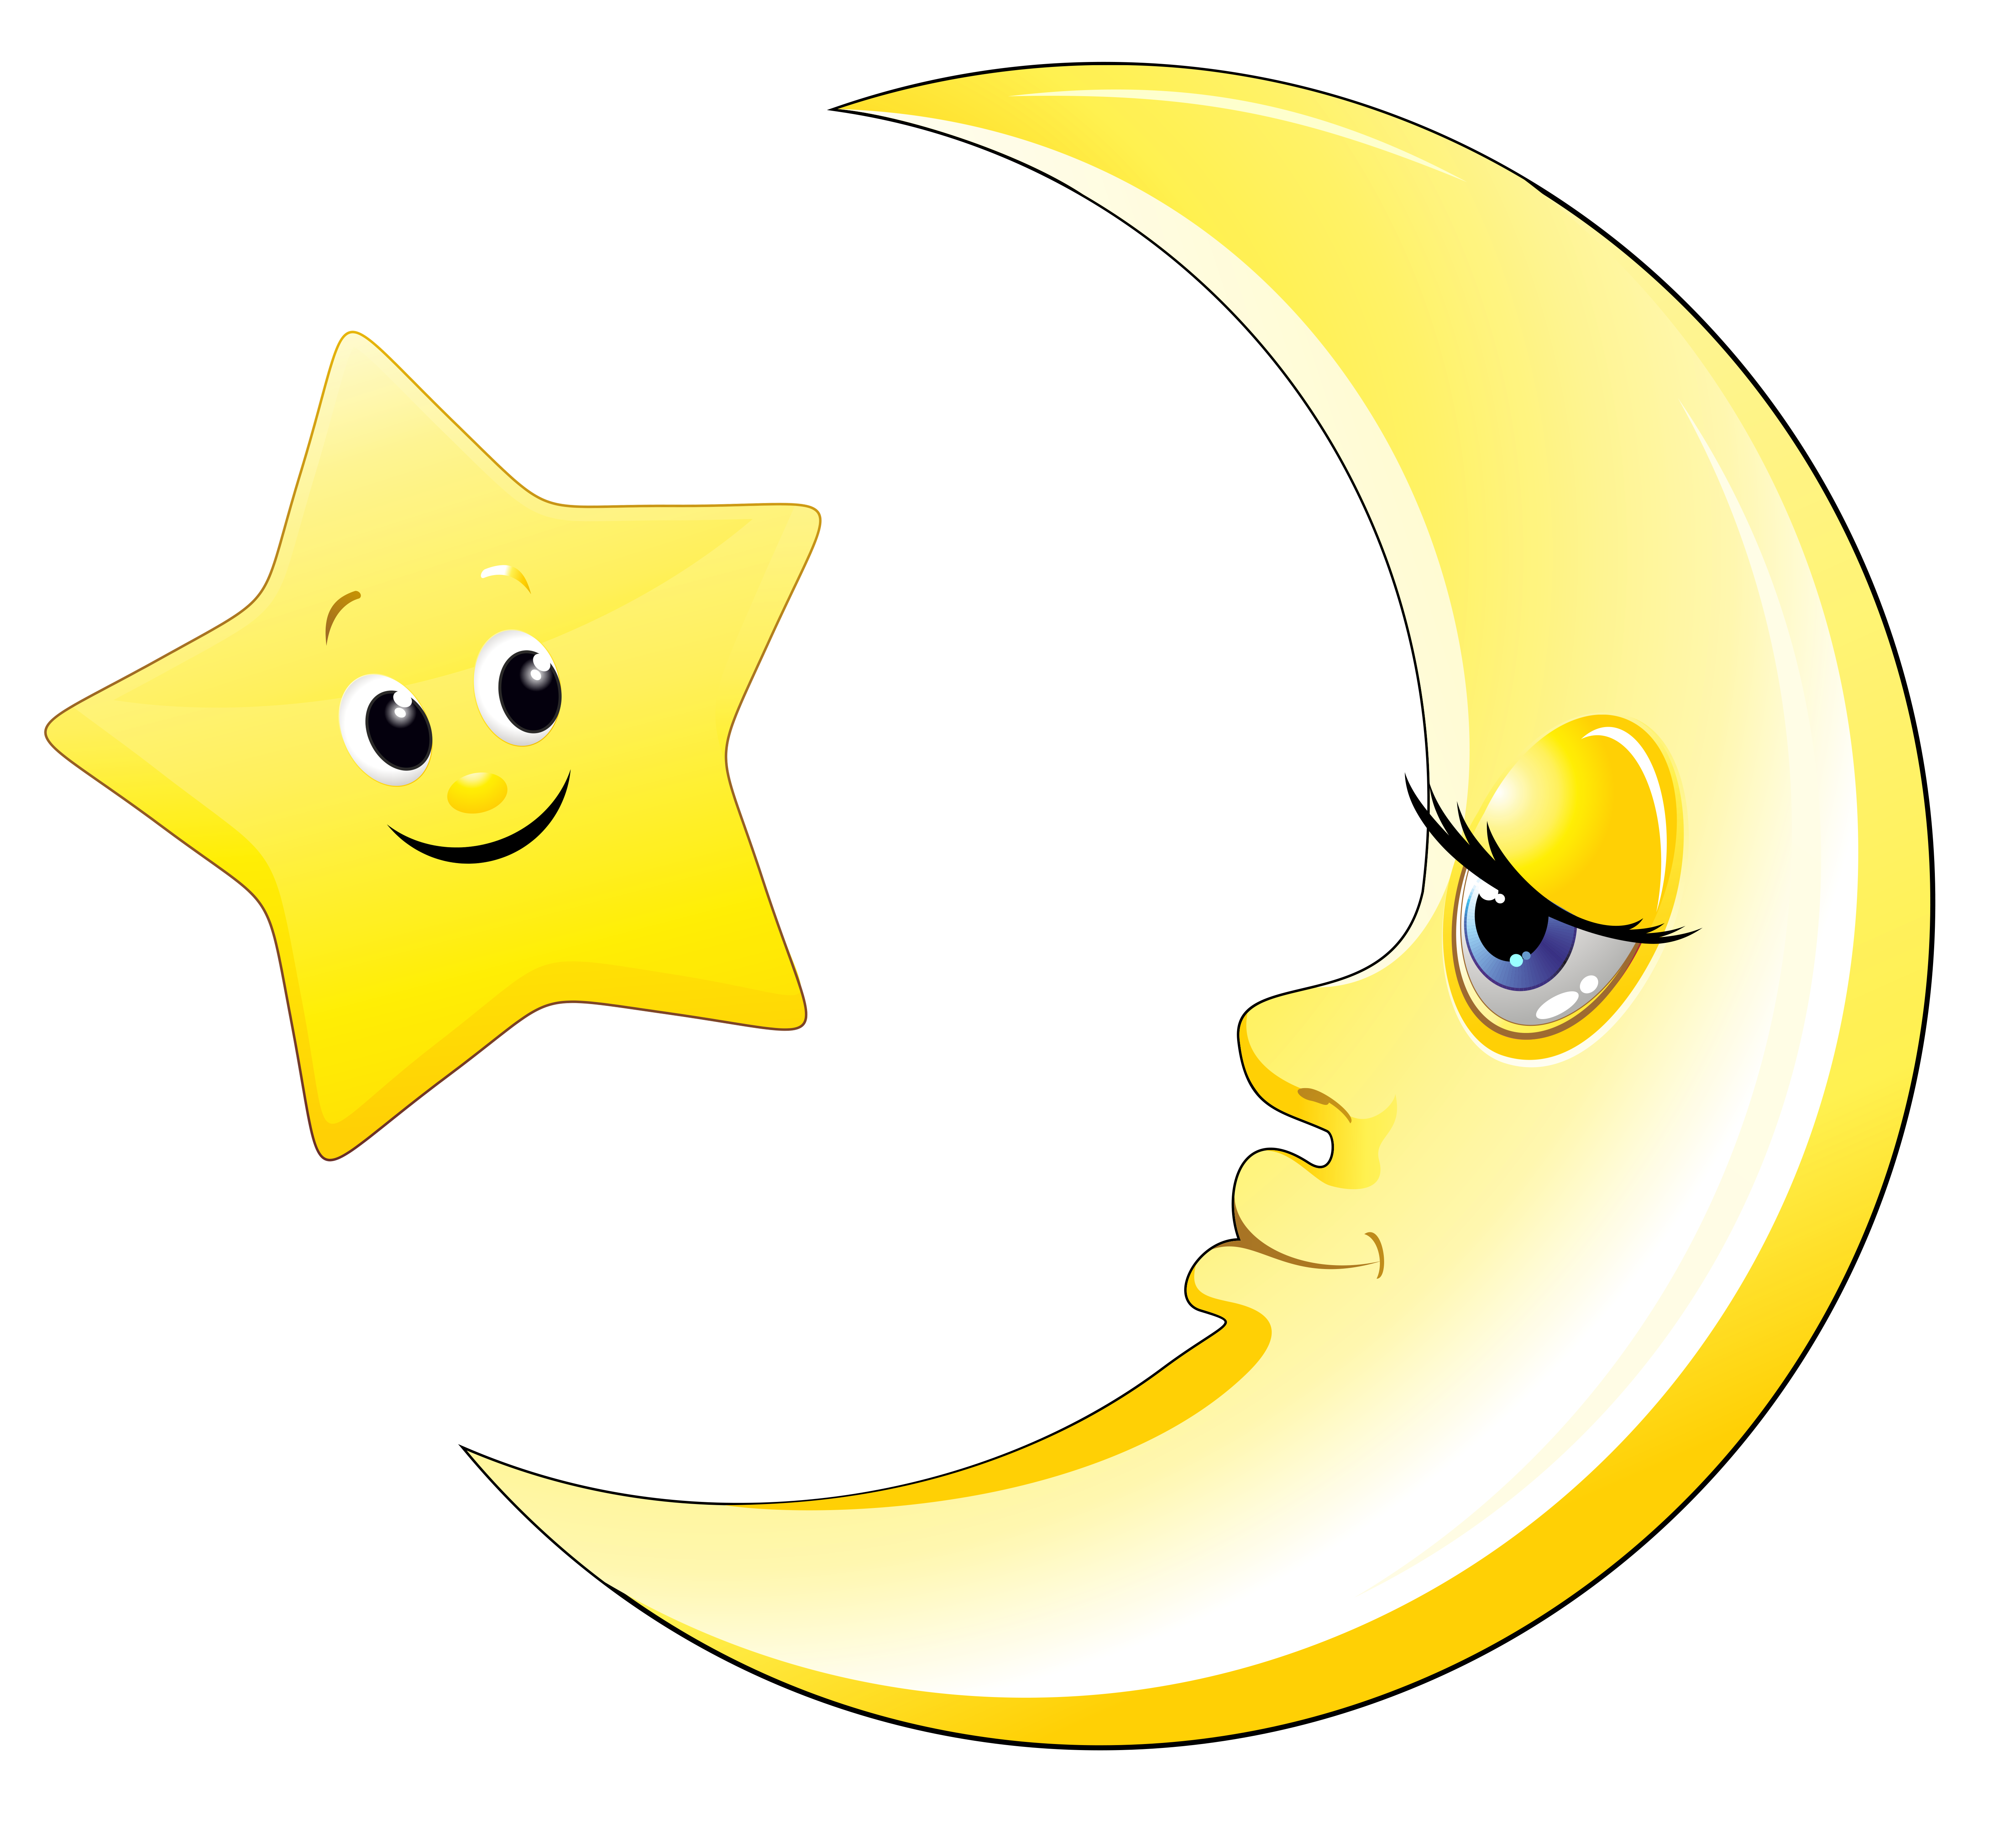 Free Transparent Moon Cliparts, Download Free Clip Art, Free